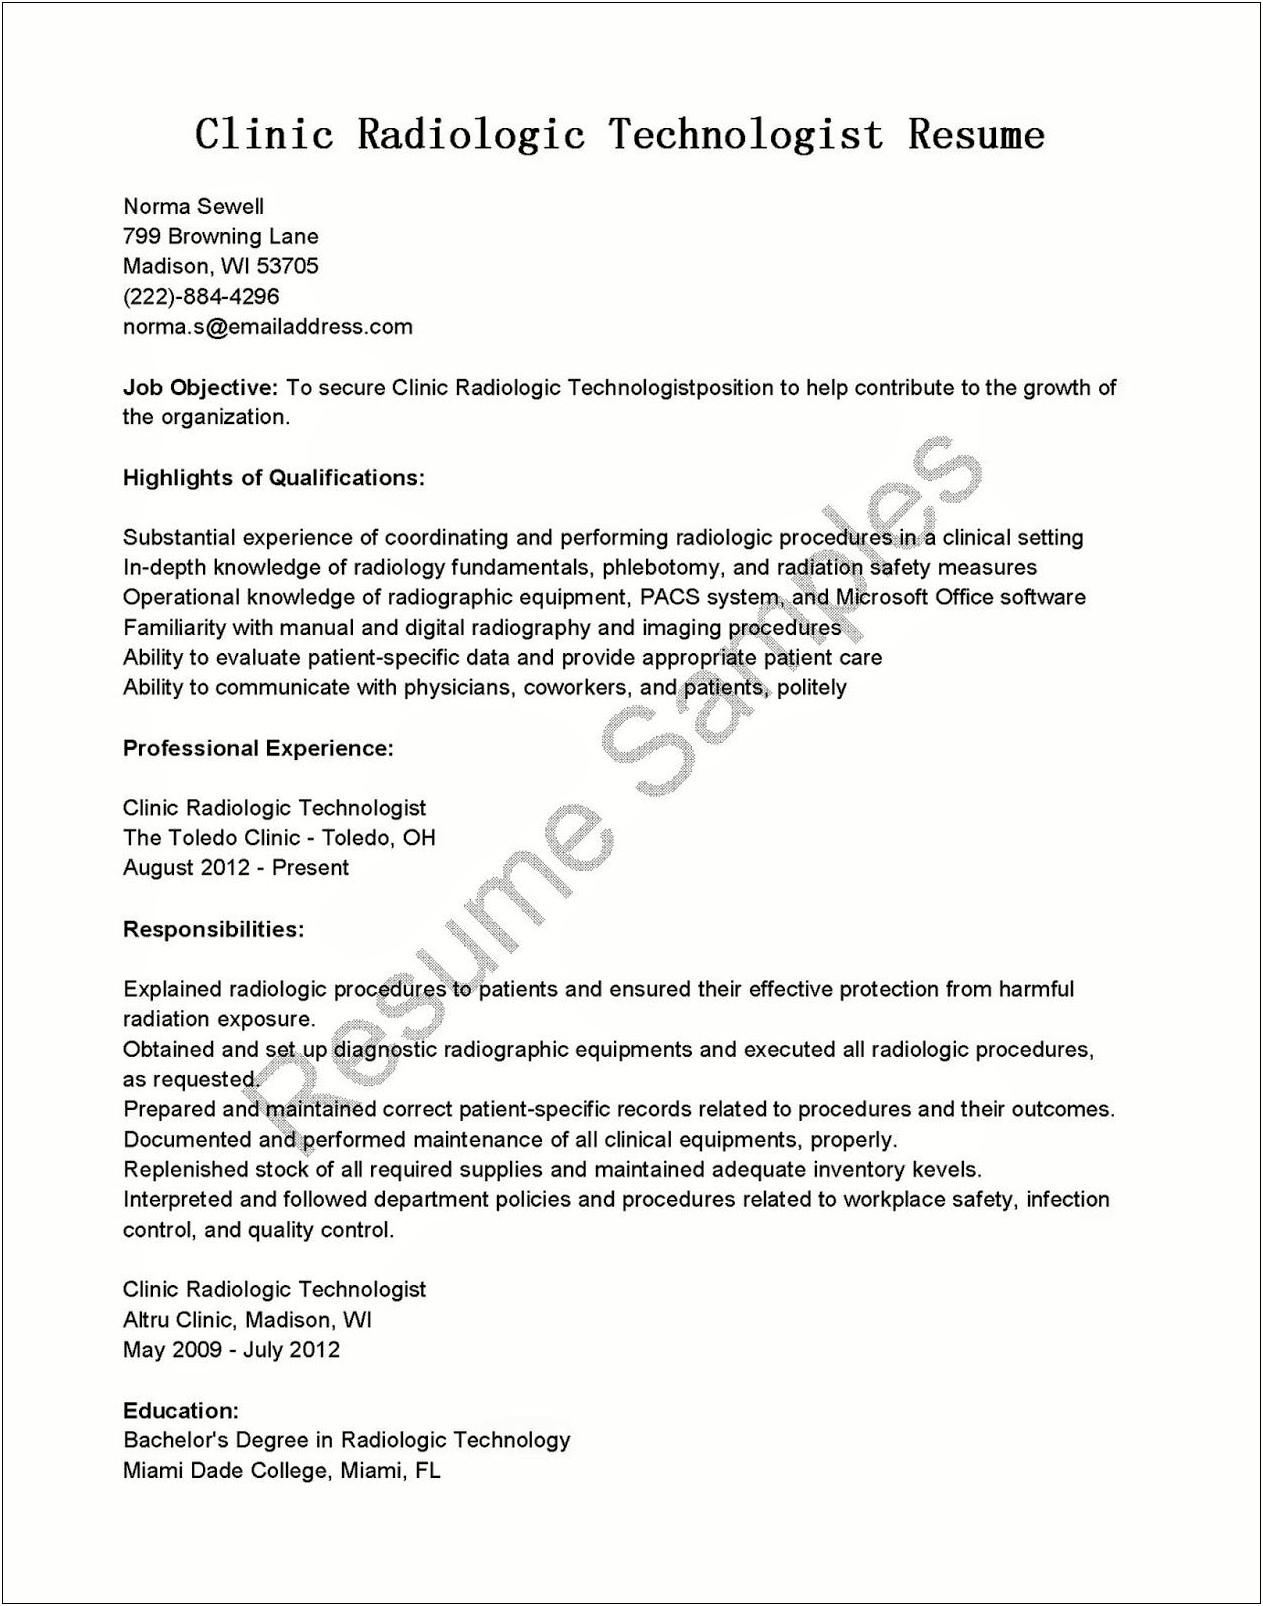 Resume Objective Examples For Radiologic Technologist